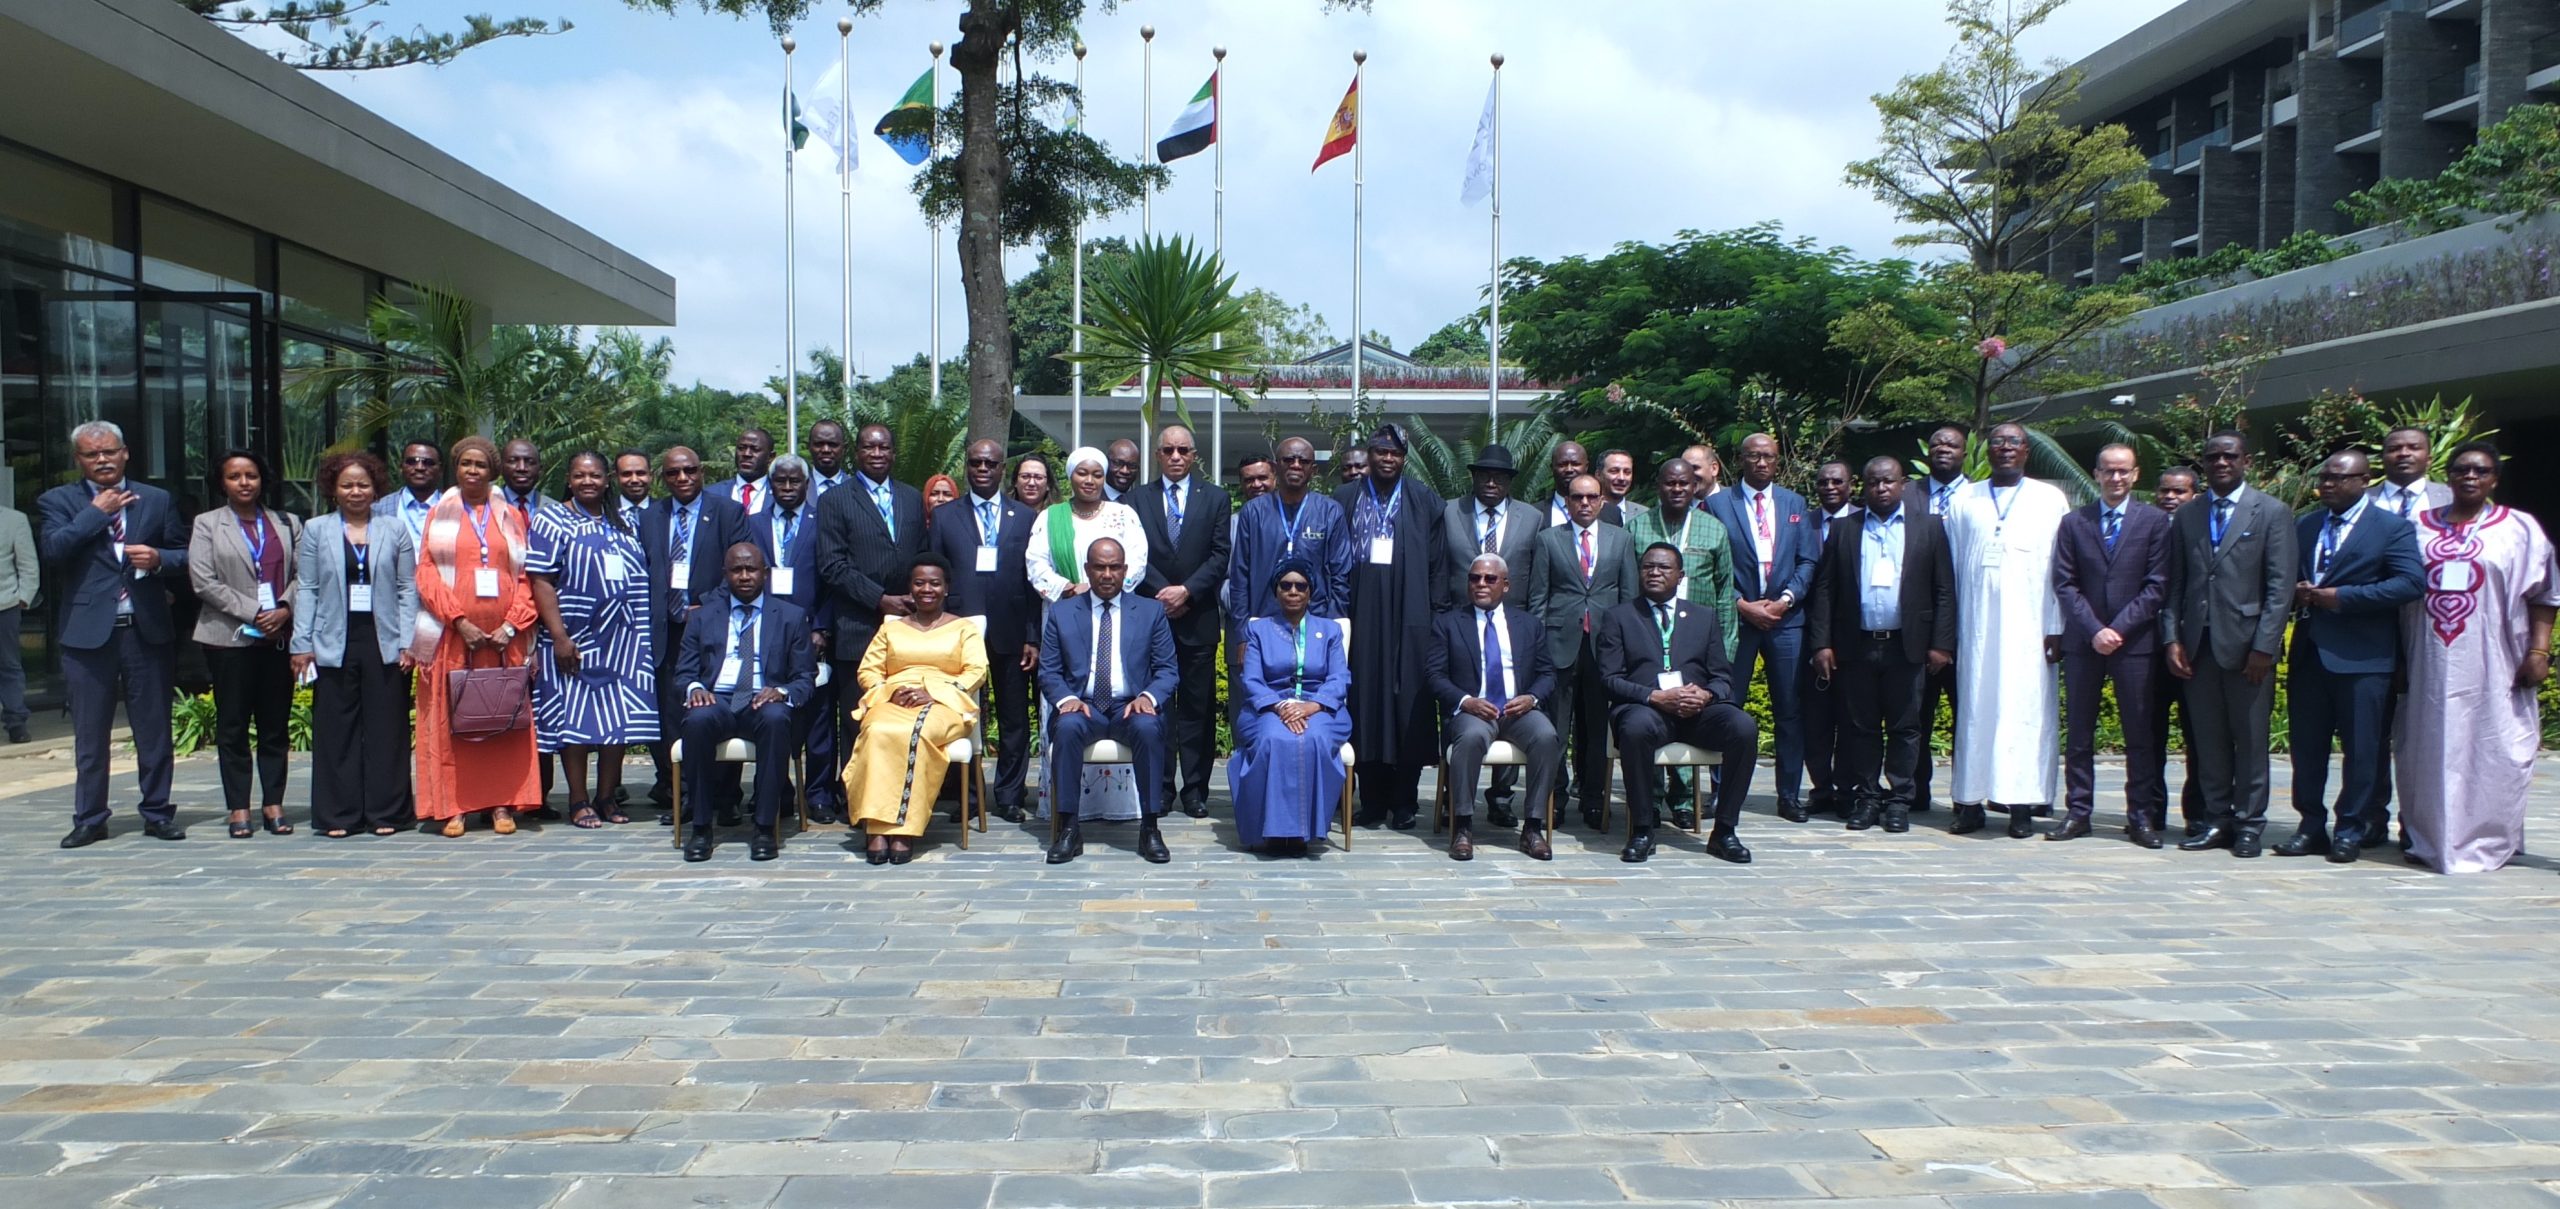 THE JOINT RETREAT OF THE AFRICAN COURT AND THE PERMANENT REPRESENTATIVES TO THE AU IN ARUSHA